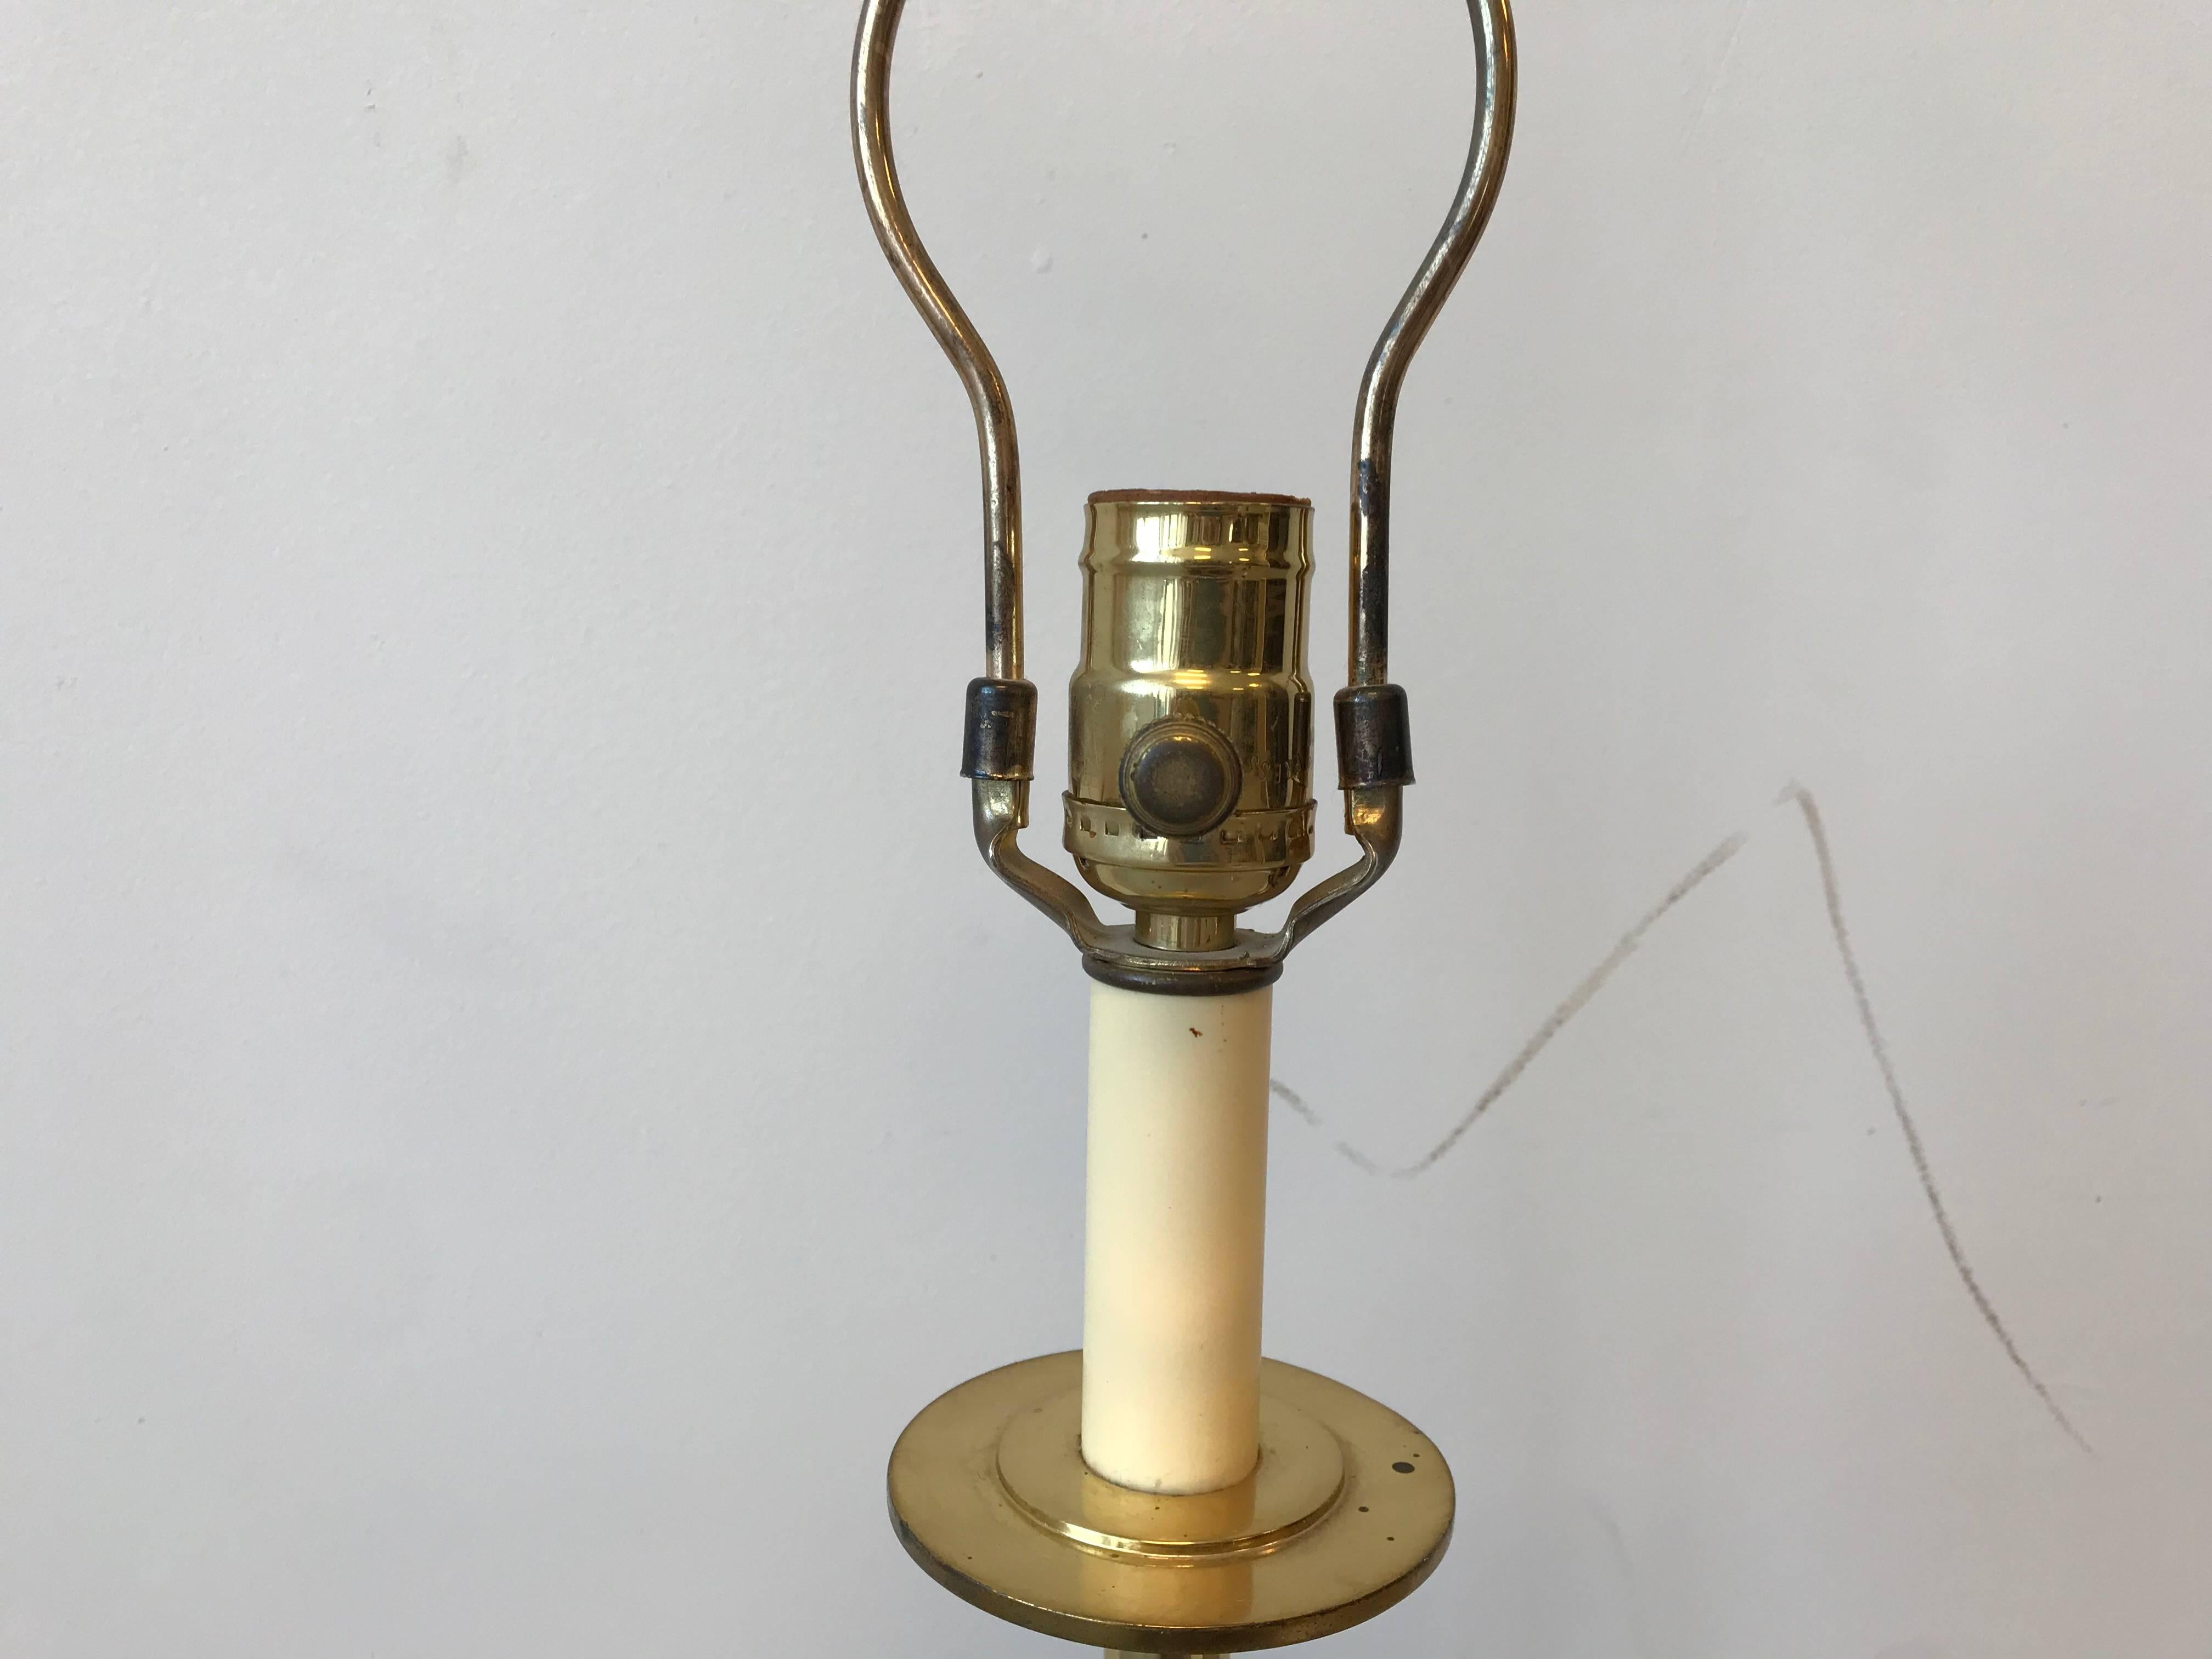 Modern 1970s Italian Brass Star Lamp with Crescent Moon Finial